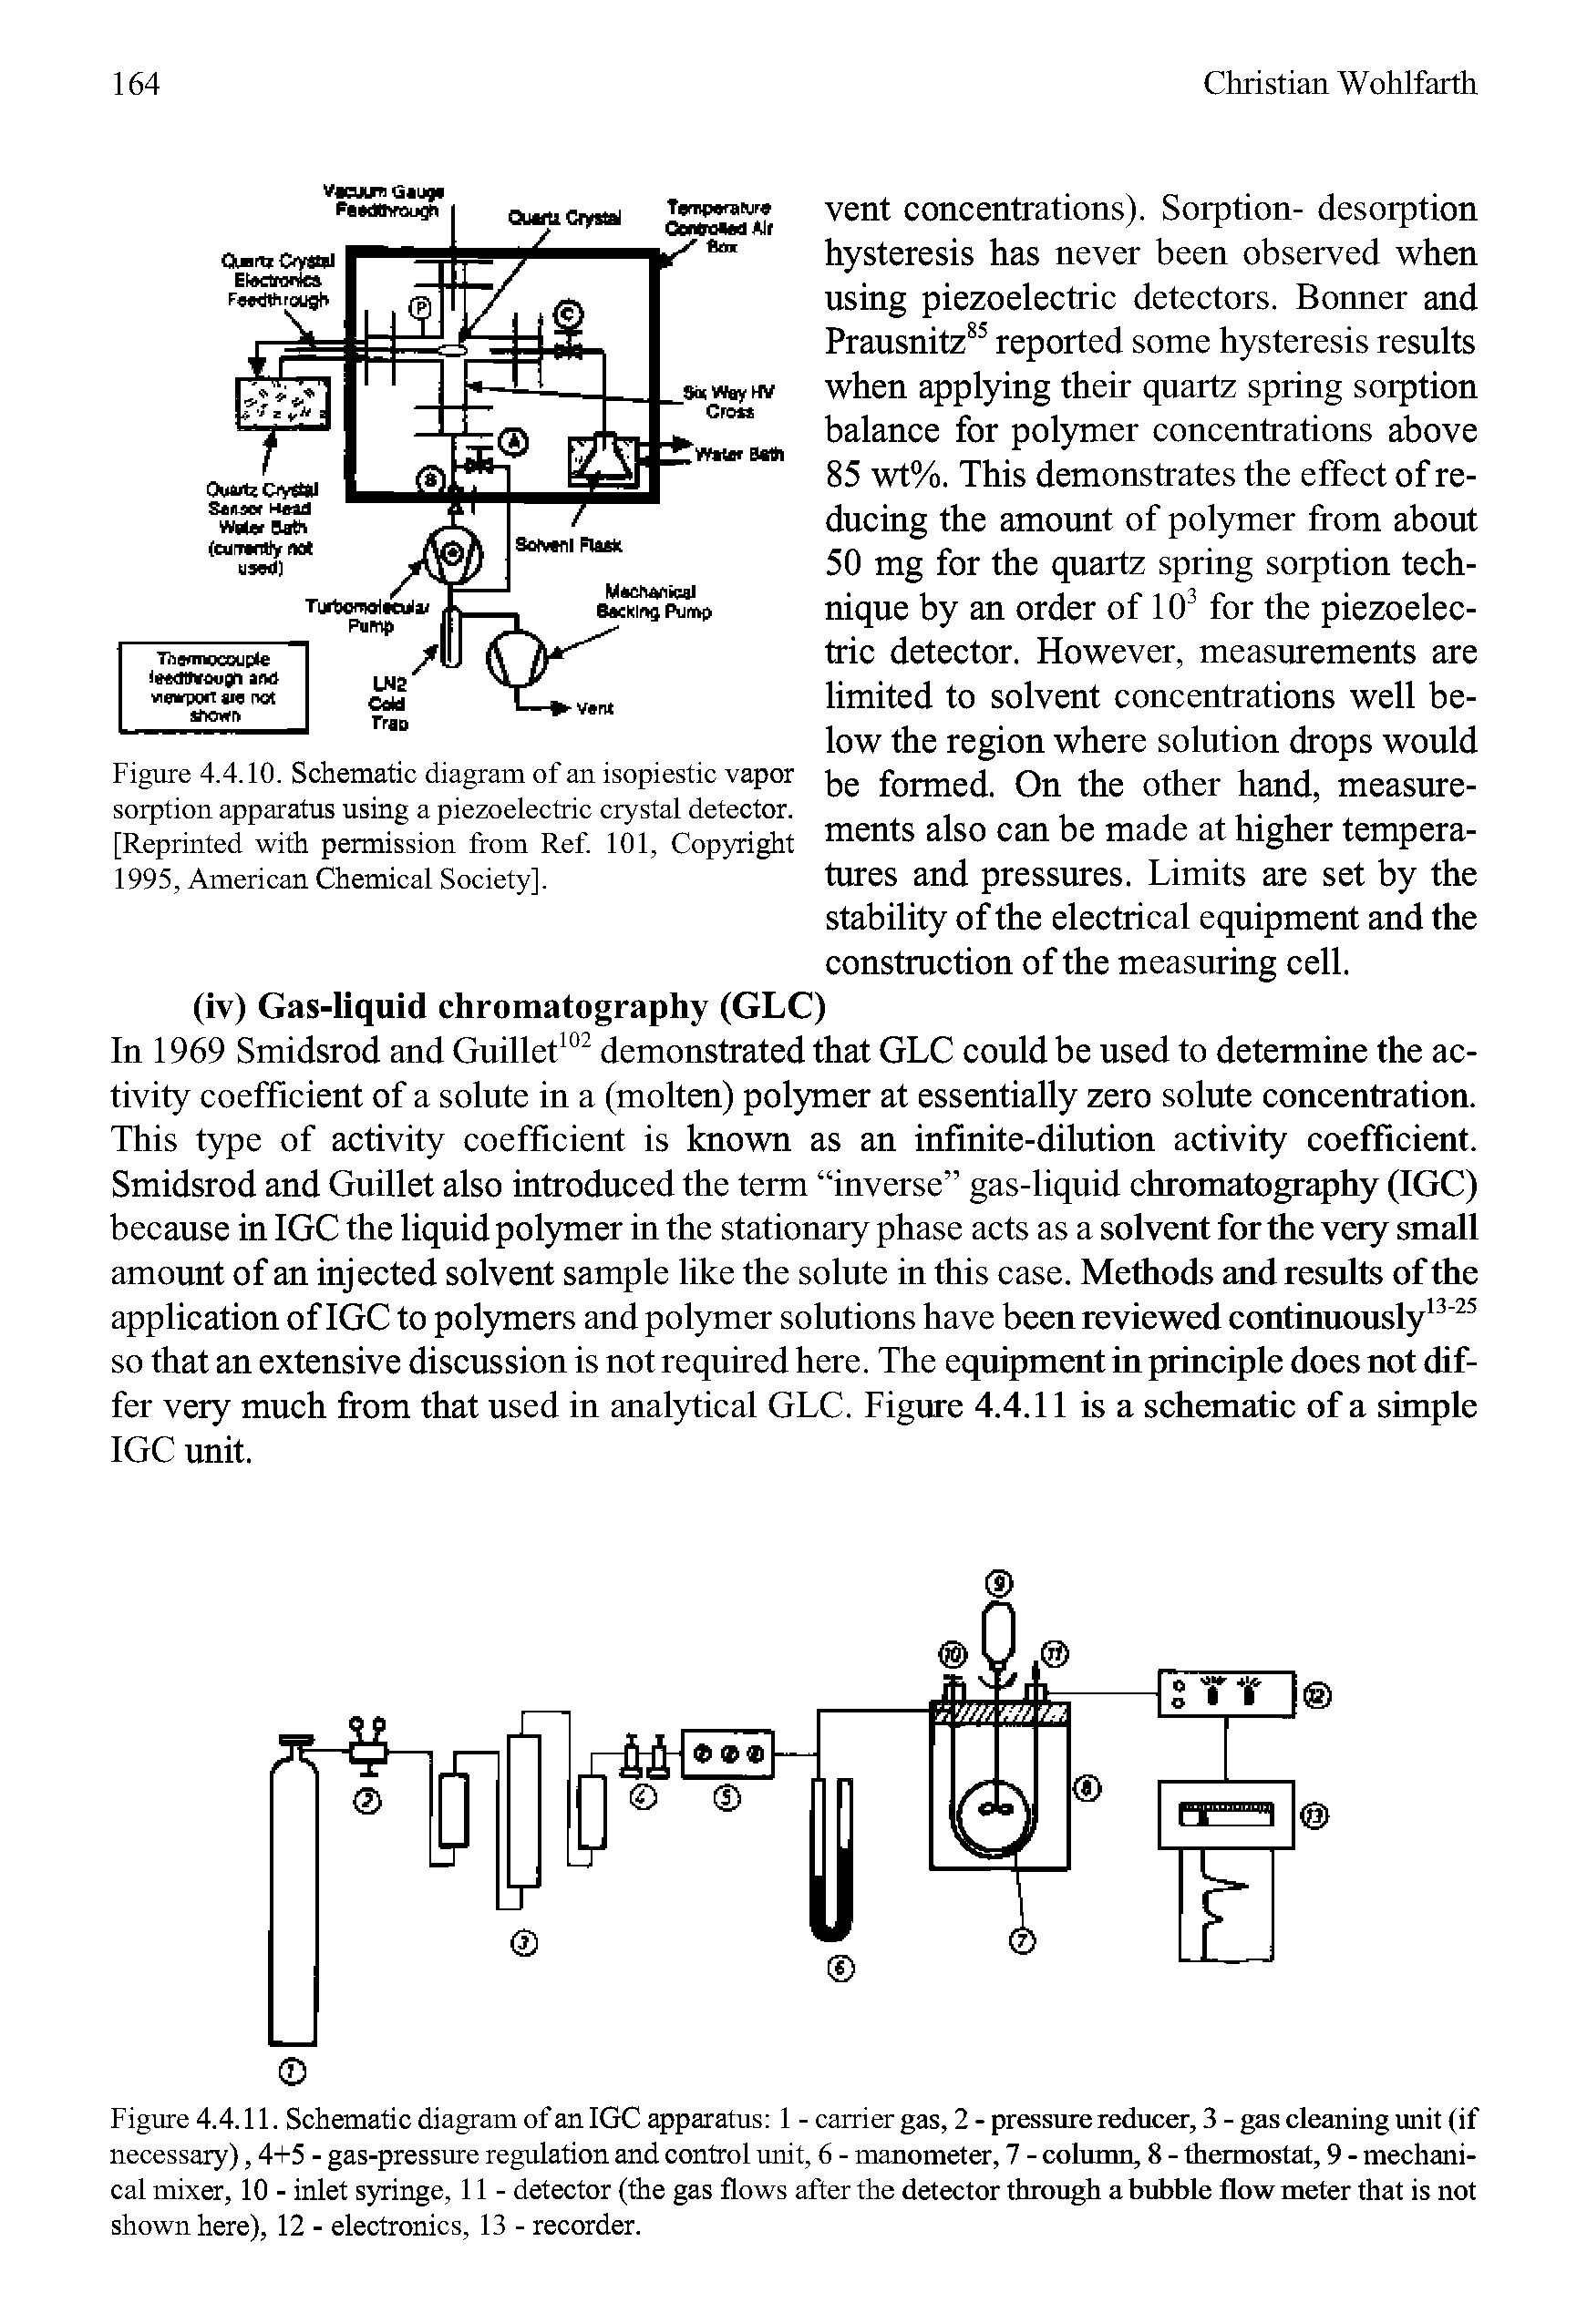 Figure 4.4.10. Schematic diagram of an isopiestic vapor sorption apparatus using a piezoelectric crystal detector. [Reprinted with permission from Ref 101, Copyright 1995, American Chemical Society].